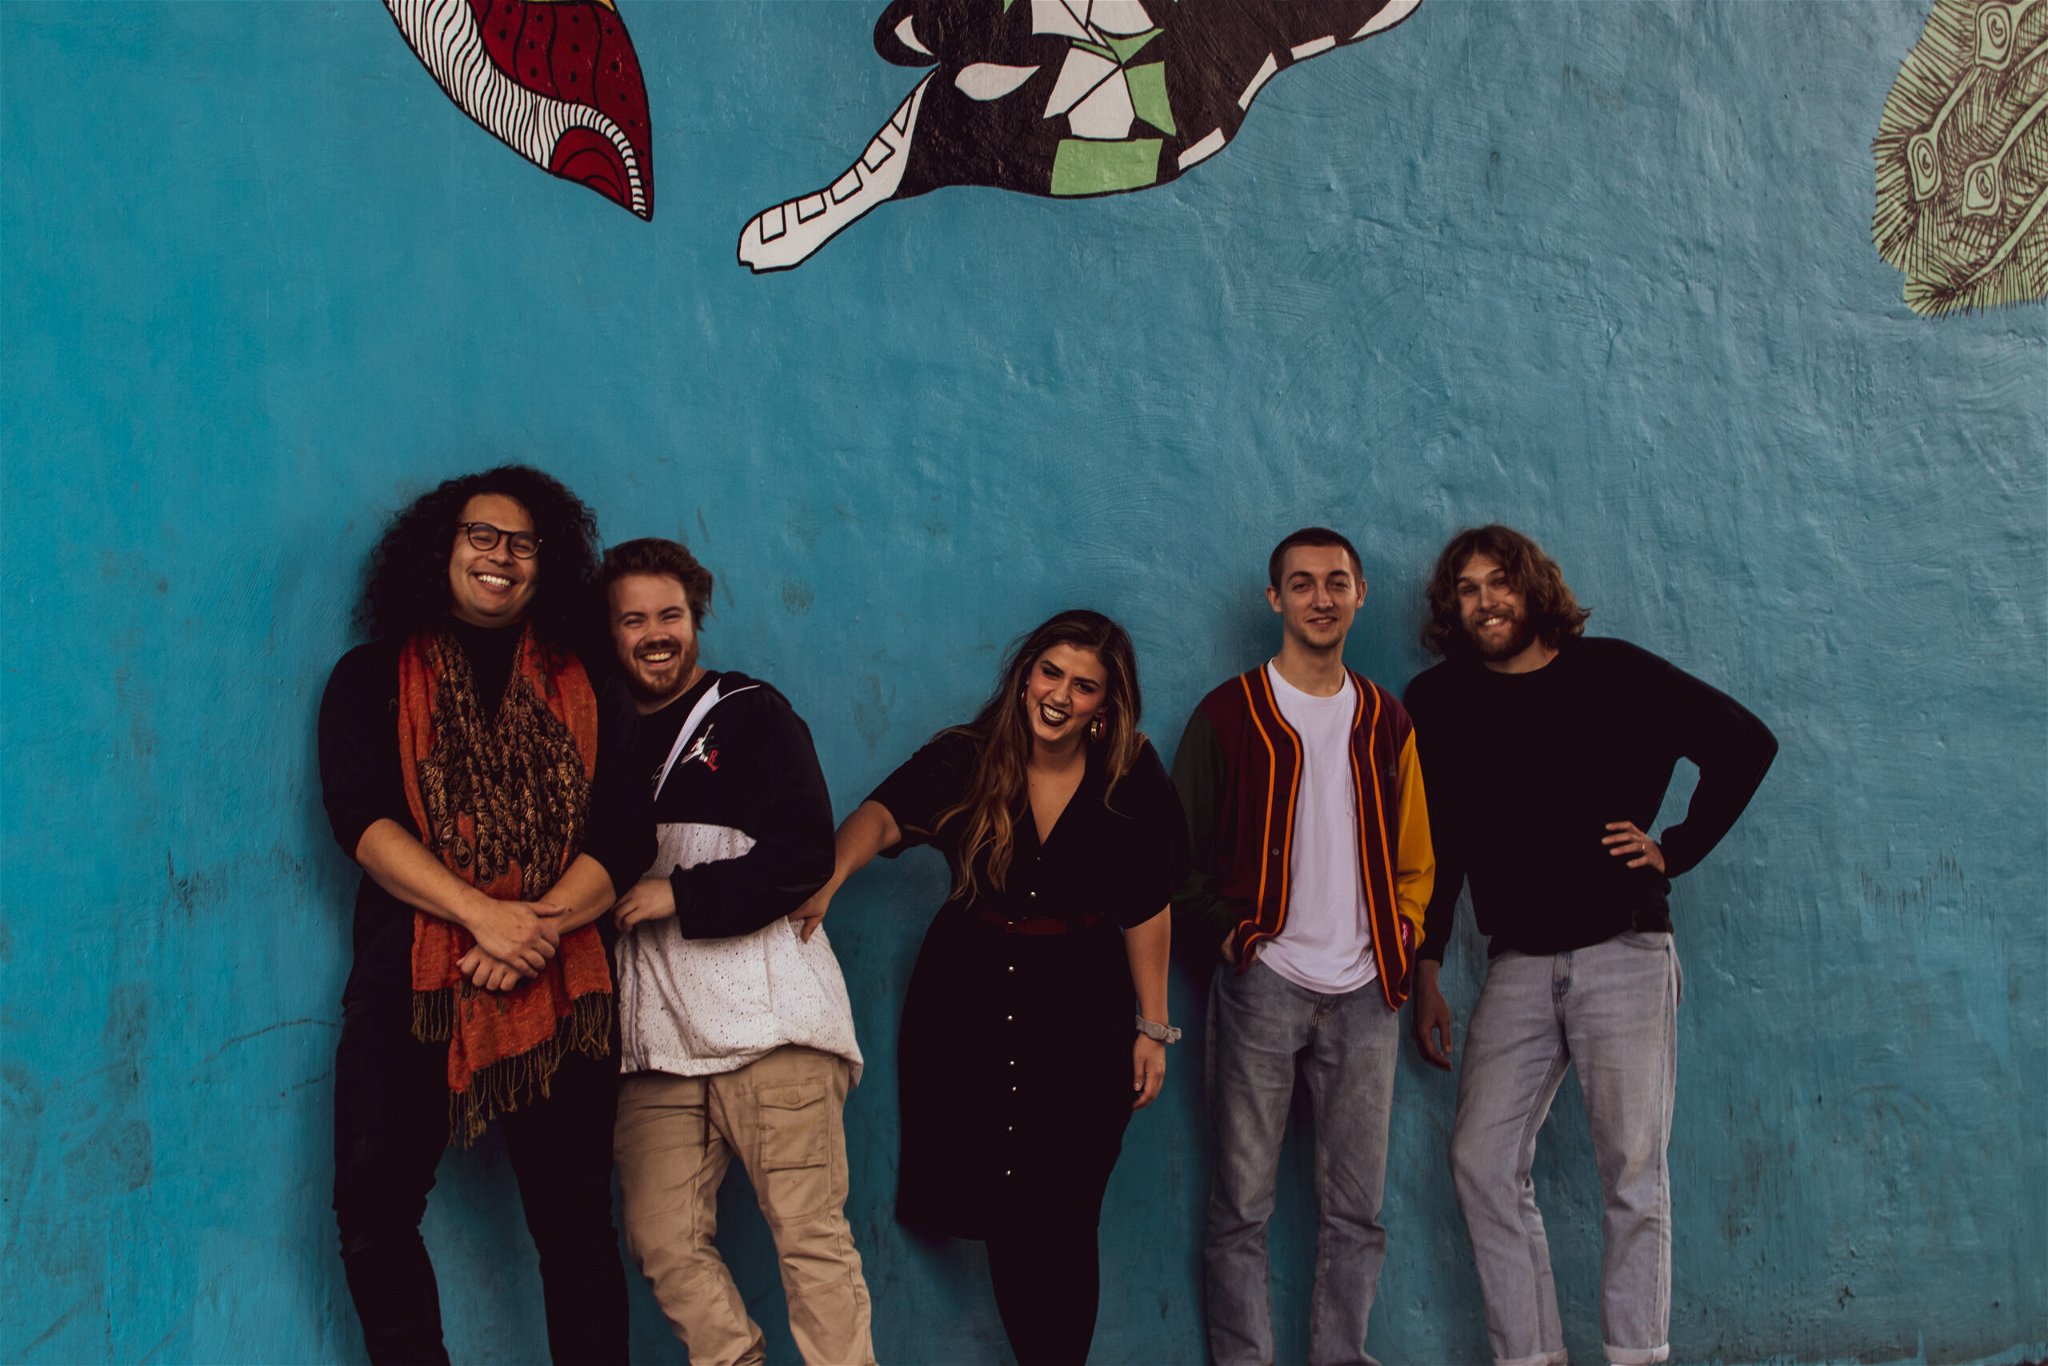 Florencia & The Feeling - The band members standing and laughing together, creating a joyful and lively atmosphere. They will be preforming for Music in the Village with Florencia & the Feeling at beech Mountain resort.